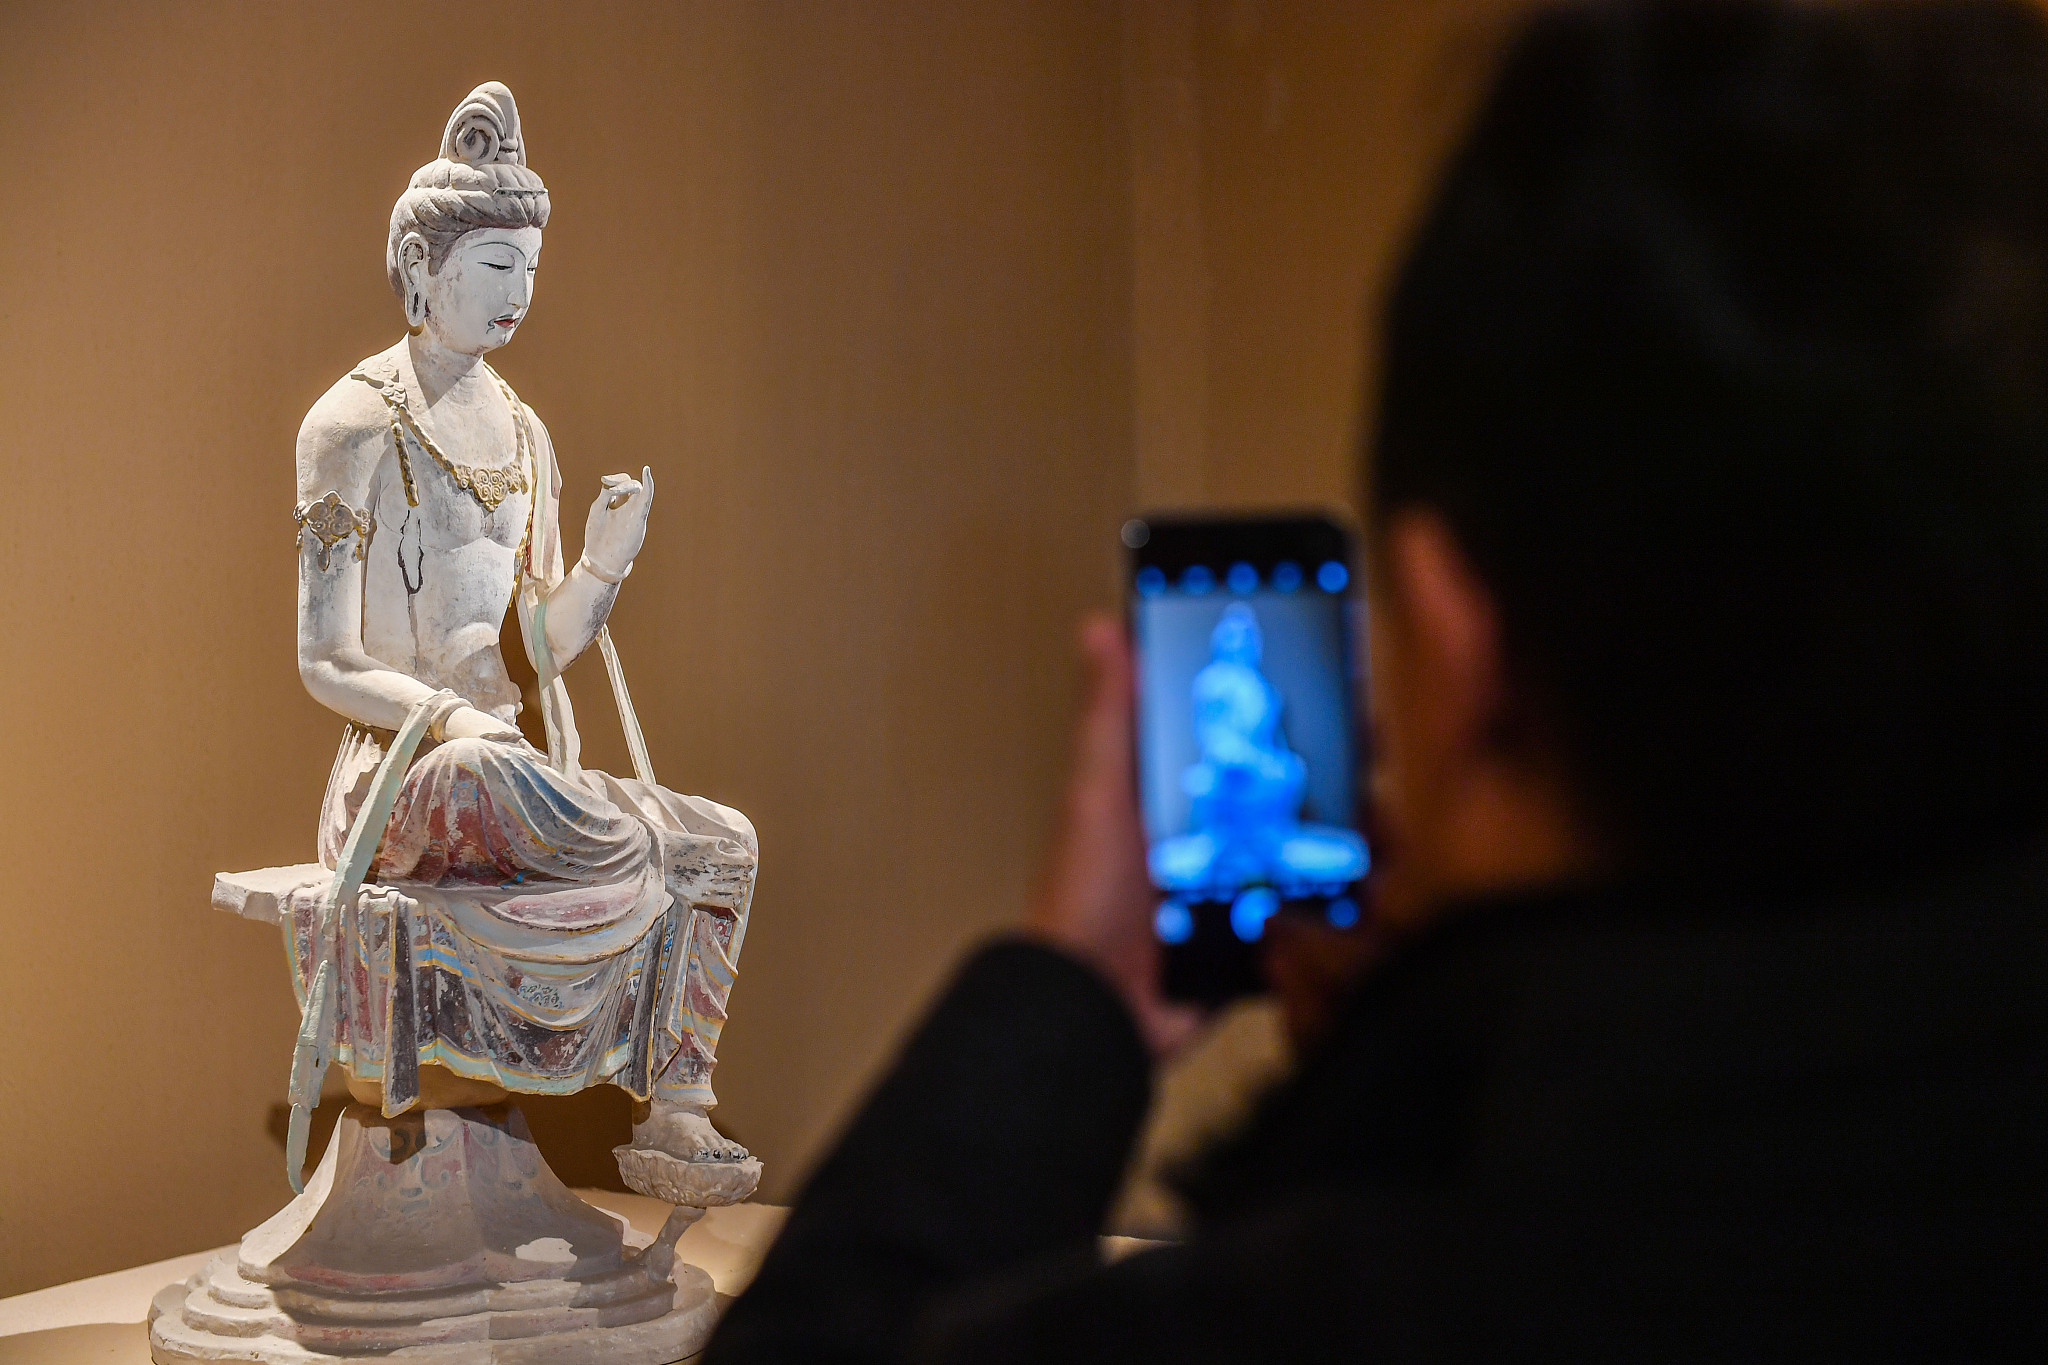 A photo taken on December 15, 2019 in Beijing shows a scaled-down 3D printed replica of a Bodhisattva statue from Cave 328 of the Dunhuang Mogao Grottoes. /CFP